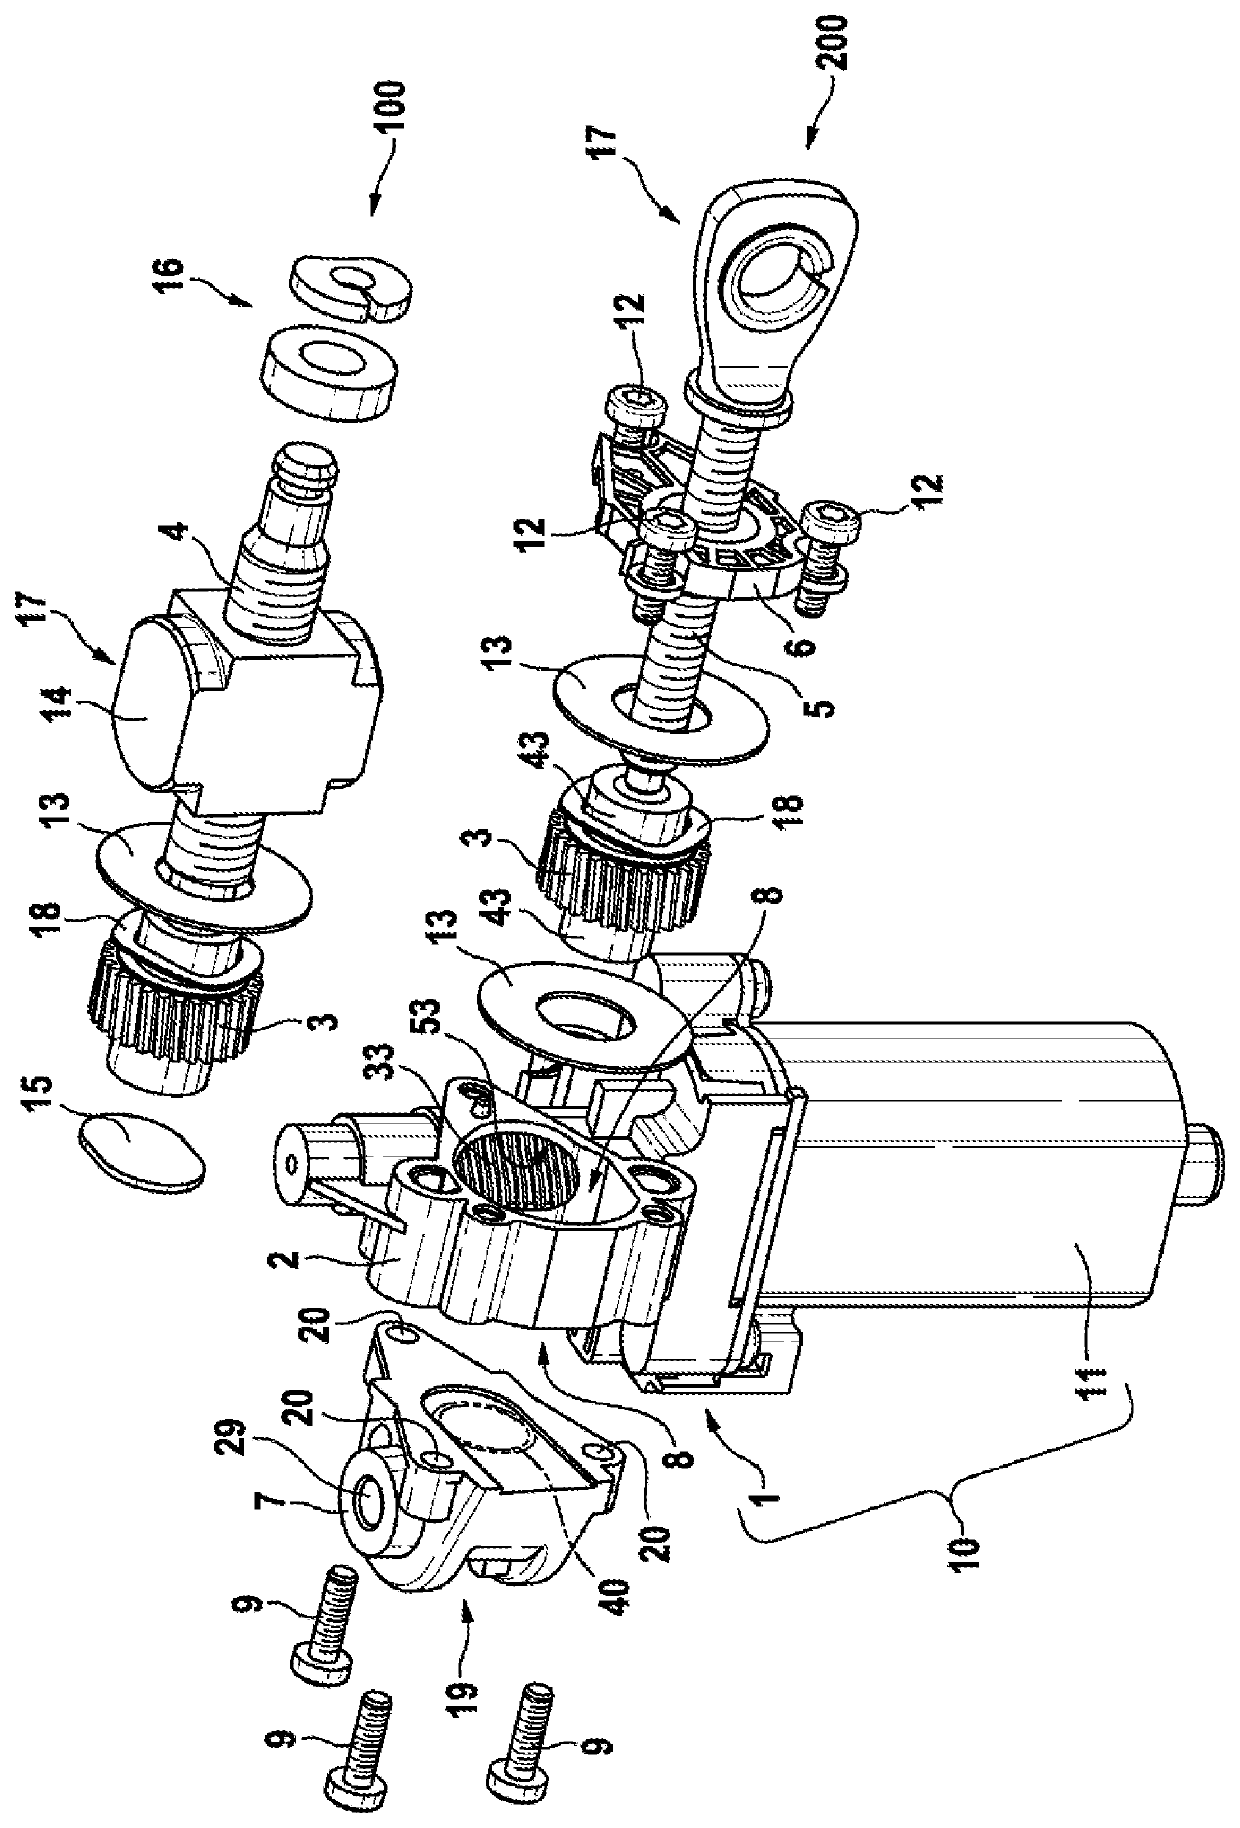 Spindle gearbox and drive unit of an electric seat drive